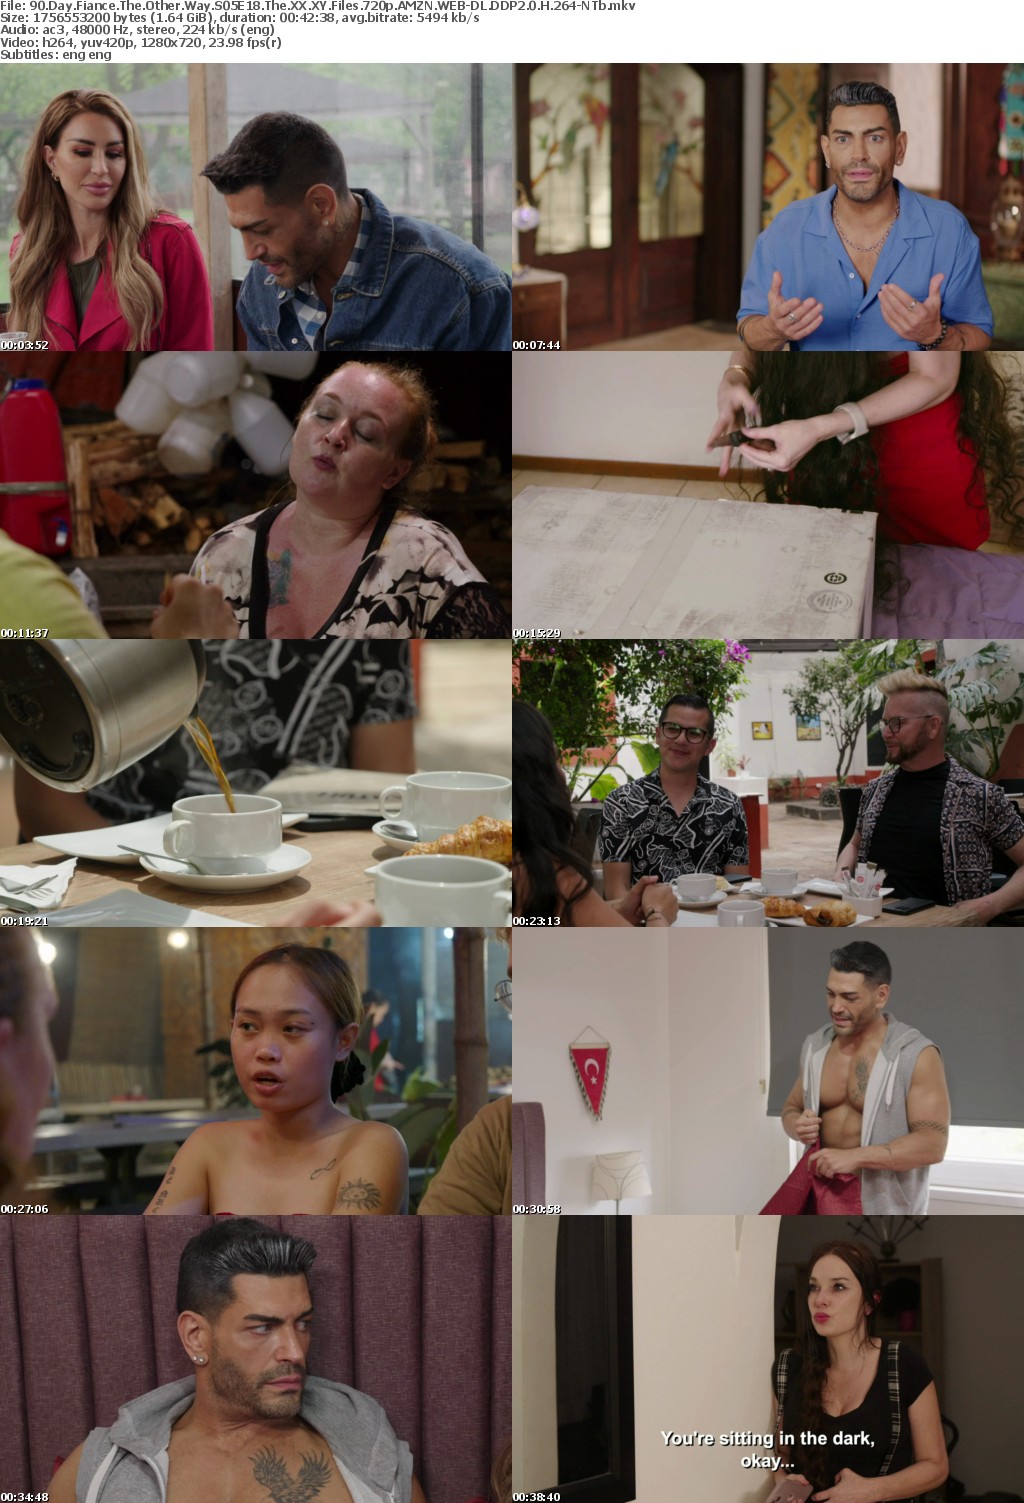 90 Day Fiance The Other Way S05E18 The XX XY Files 720p AMZN WEB-DL DDP2 0 H 264-NTb